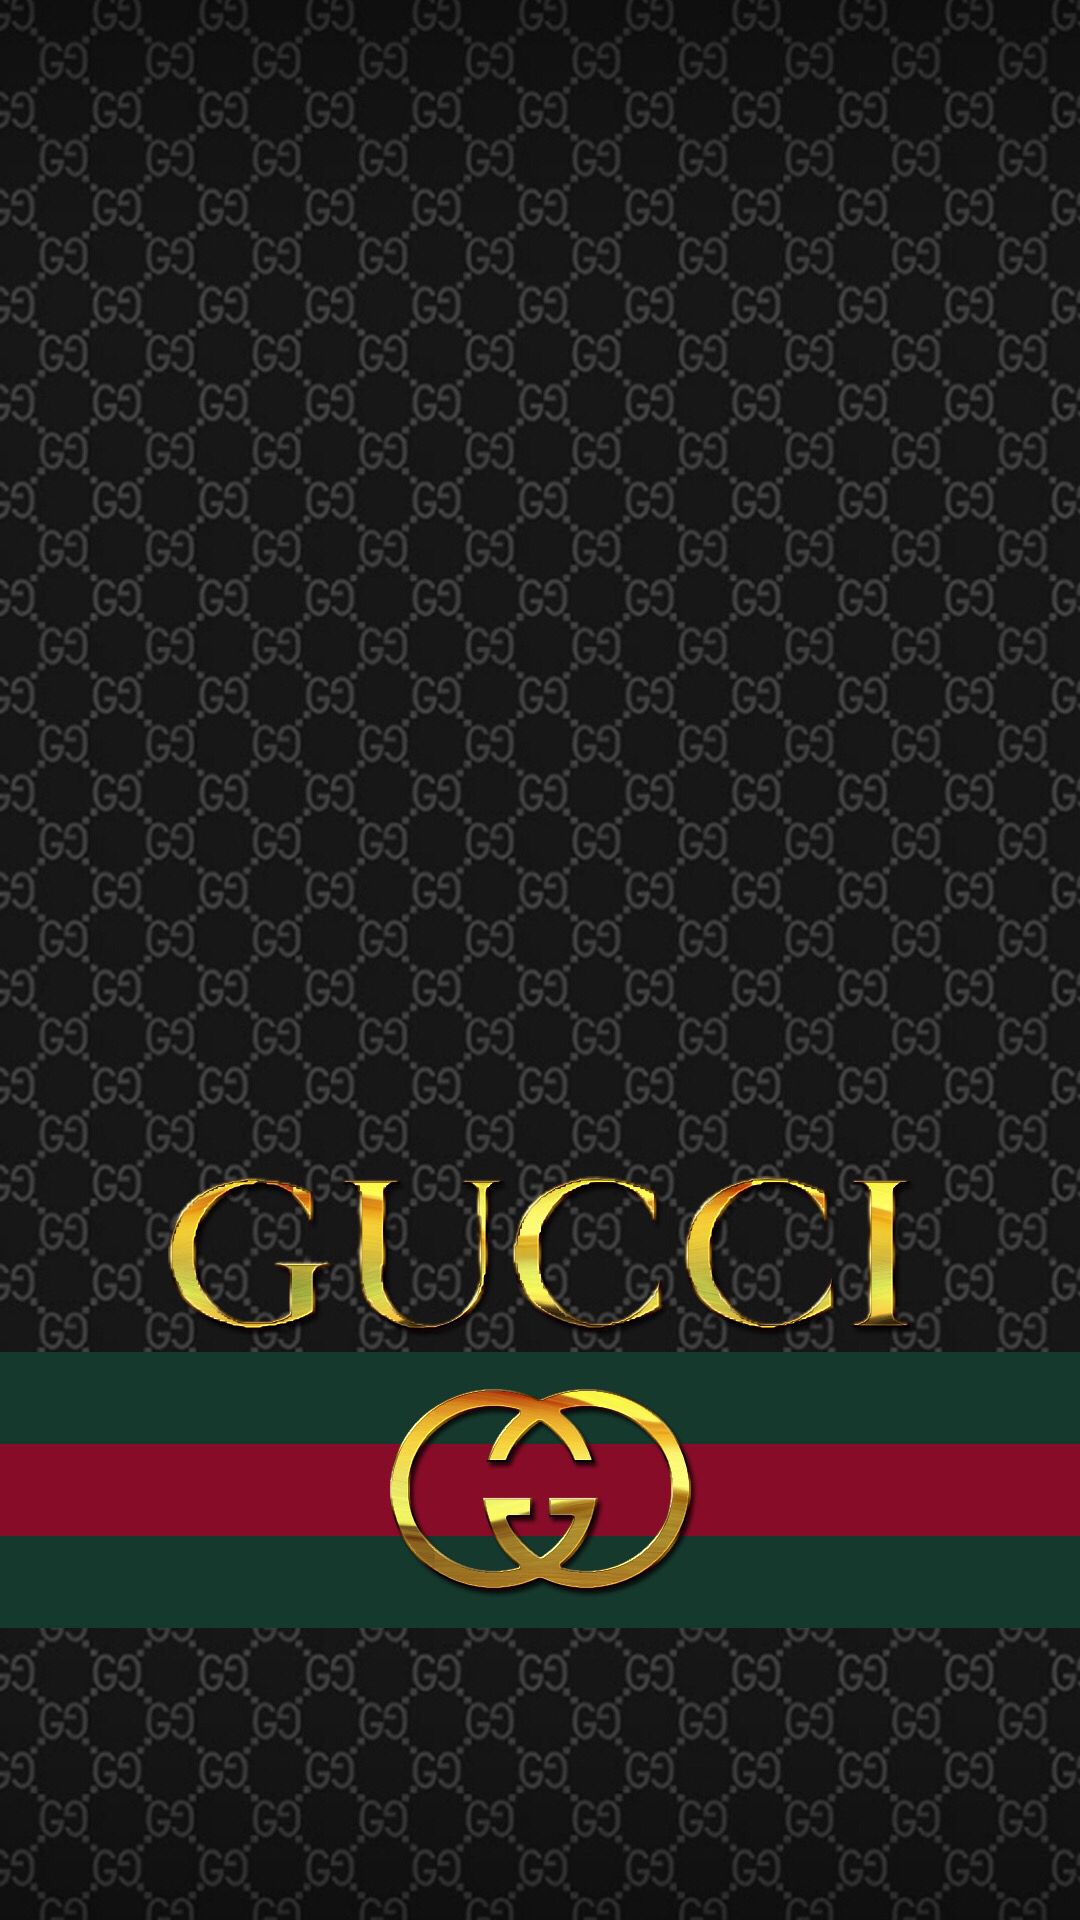 Gucci Wallpapers for iPhone Mobile - PixelsTalk.Net